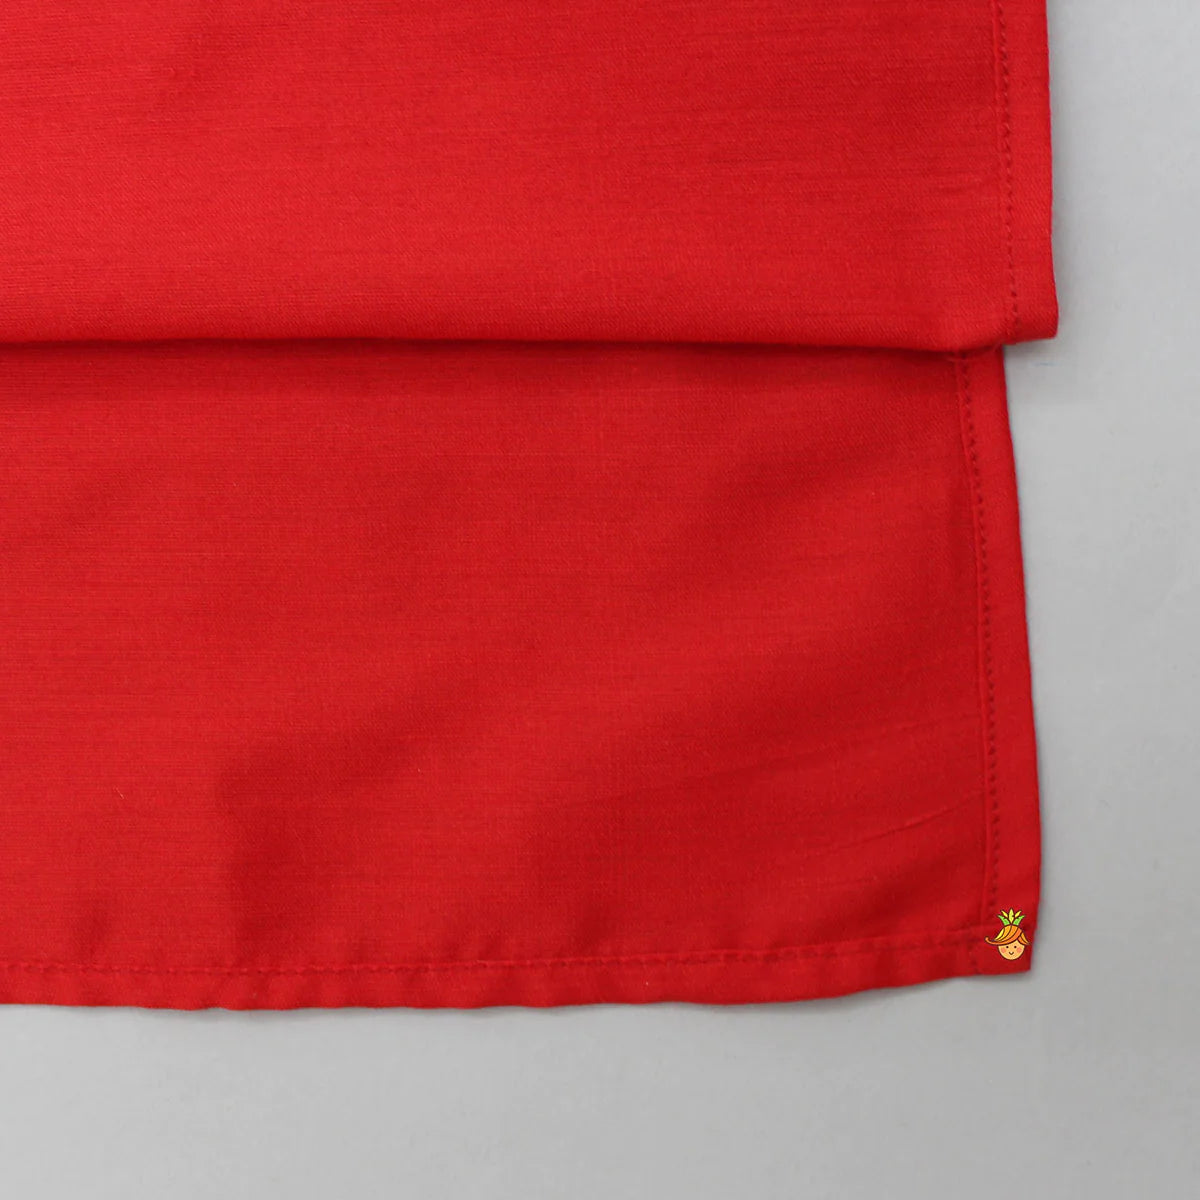 Red Kurta With Embroidery Patch